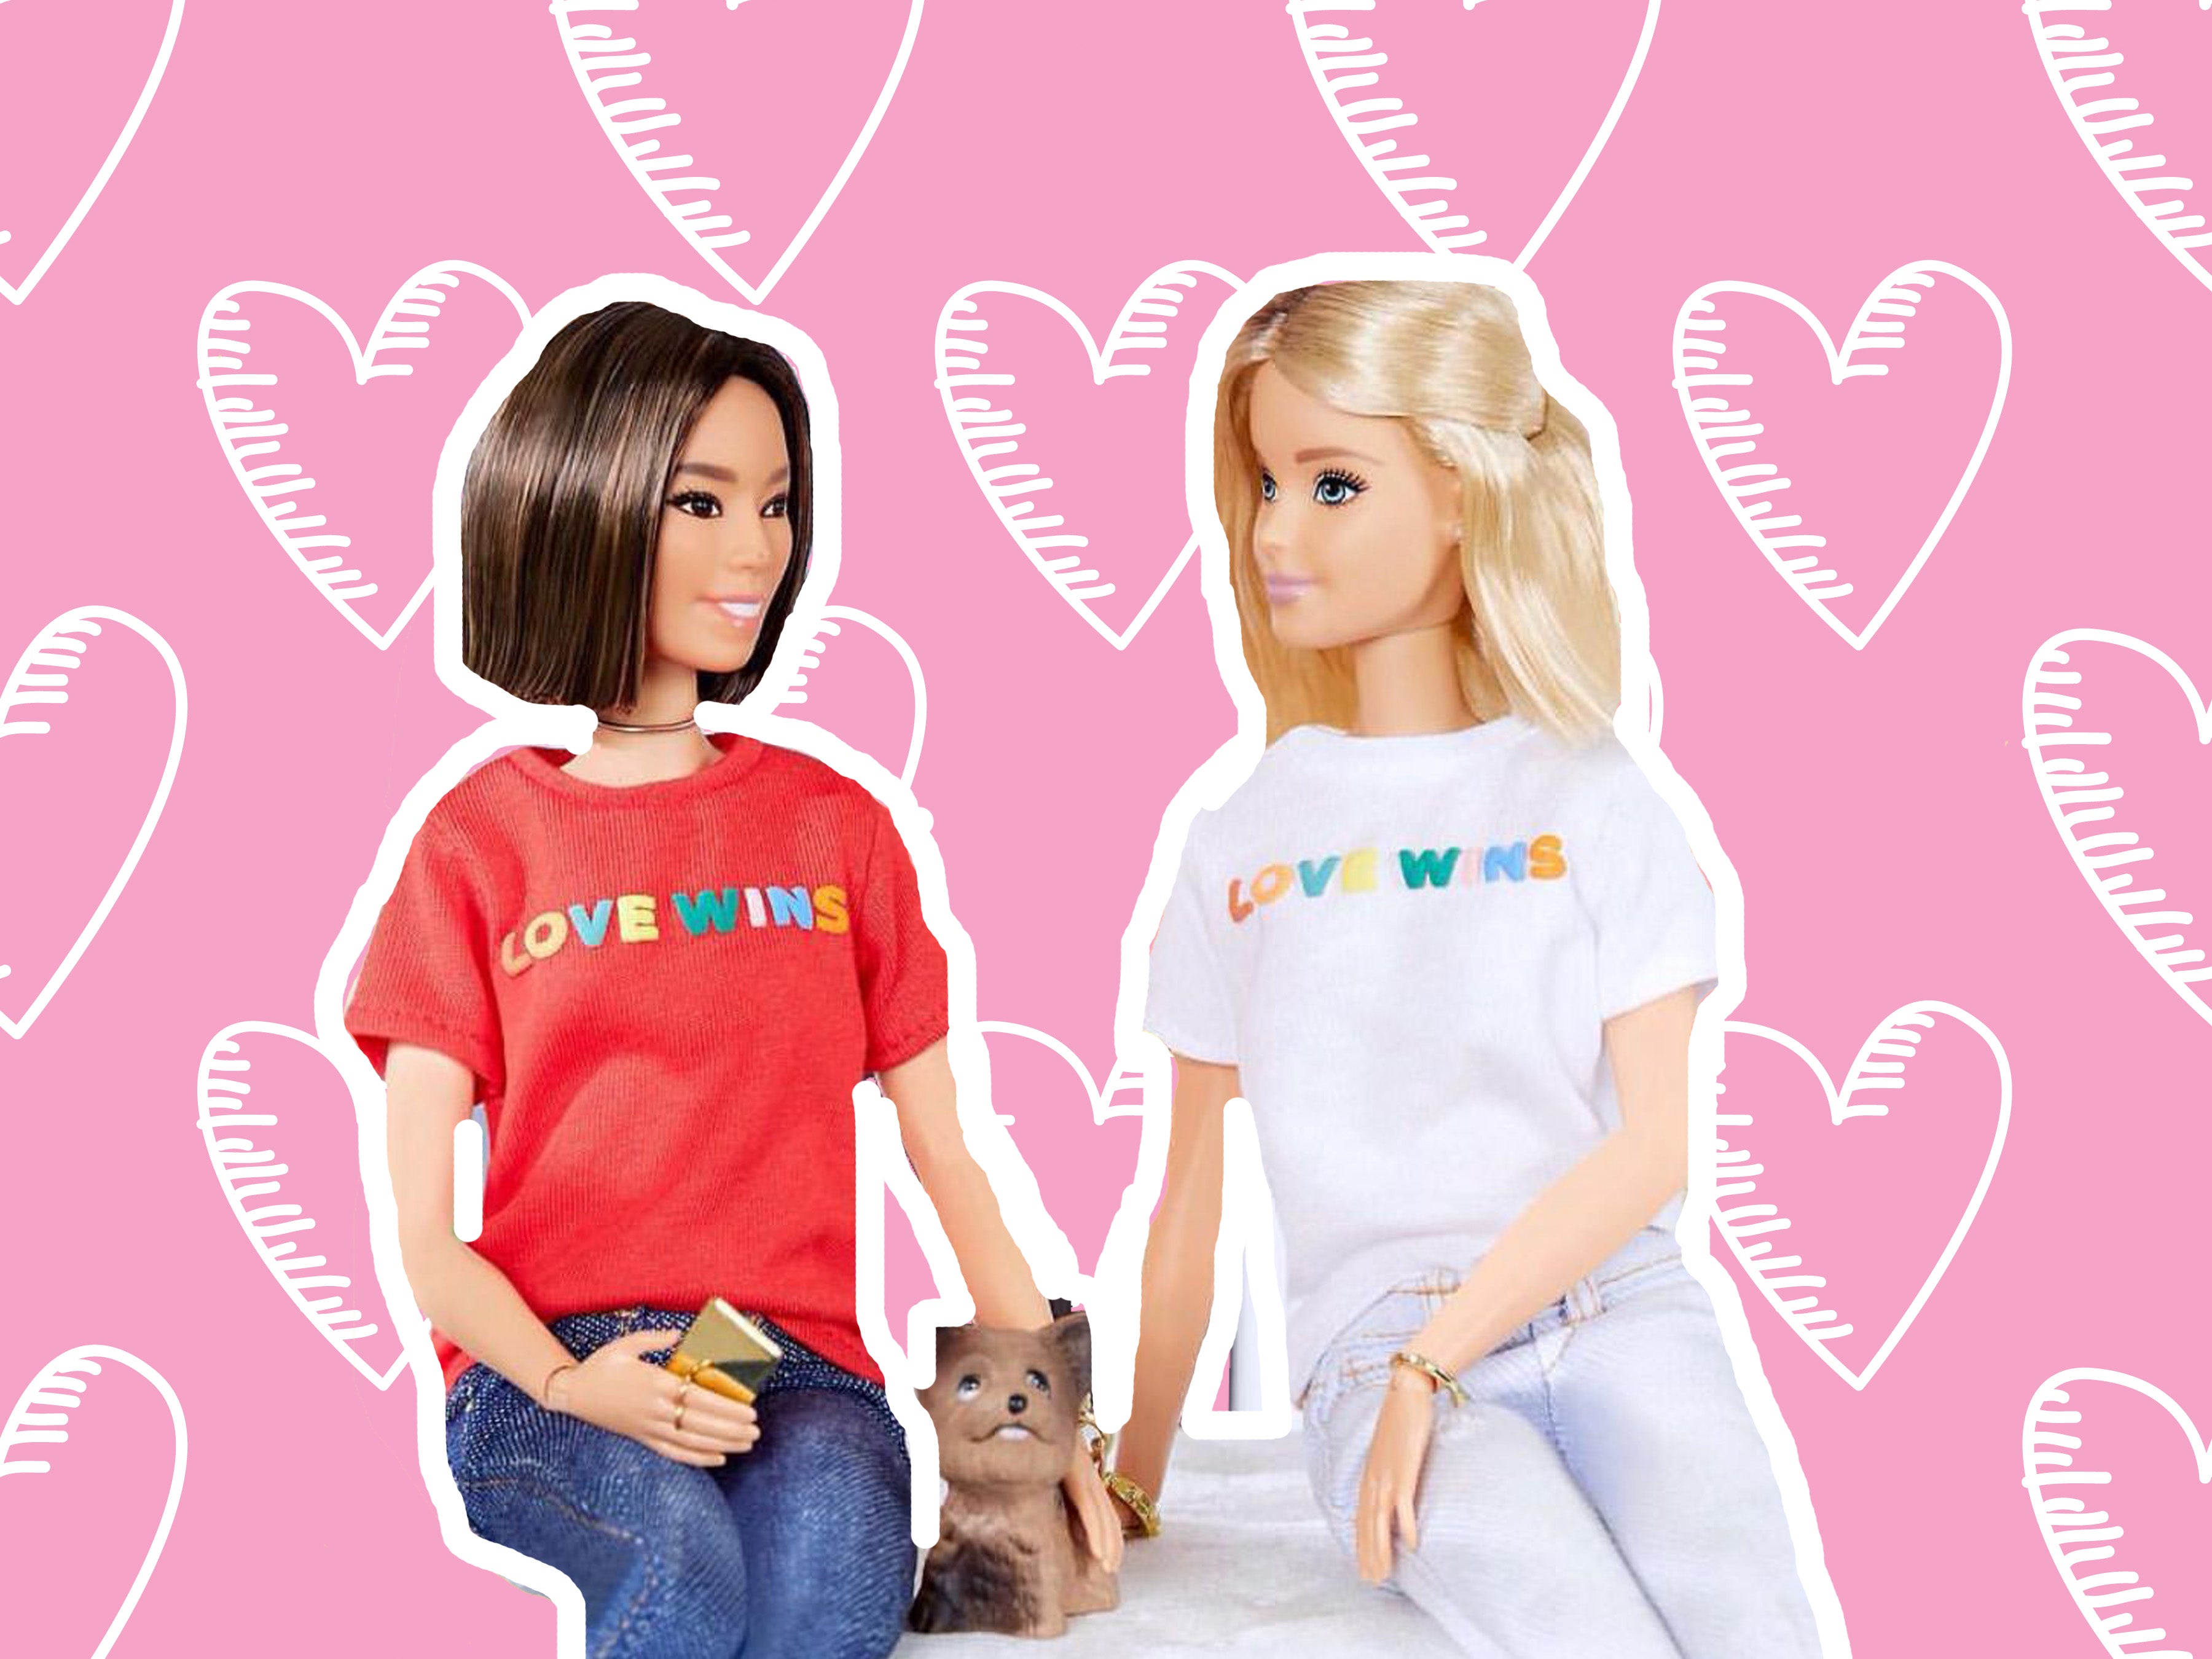 Does Barbie really have a girlfriend now? The Independent image